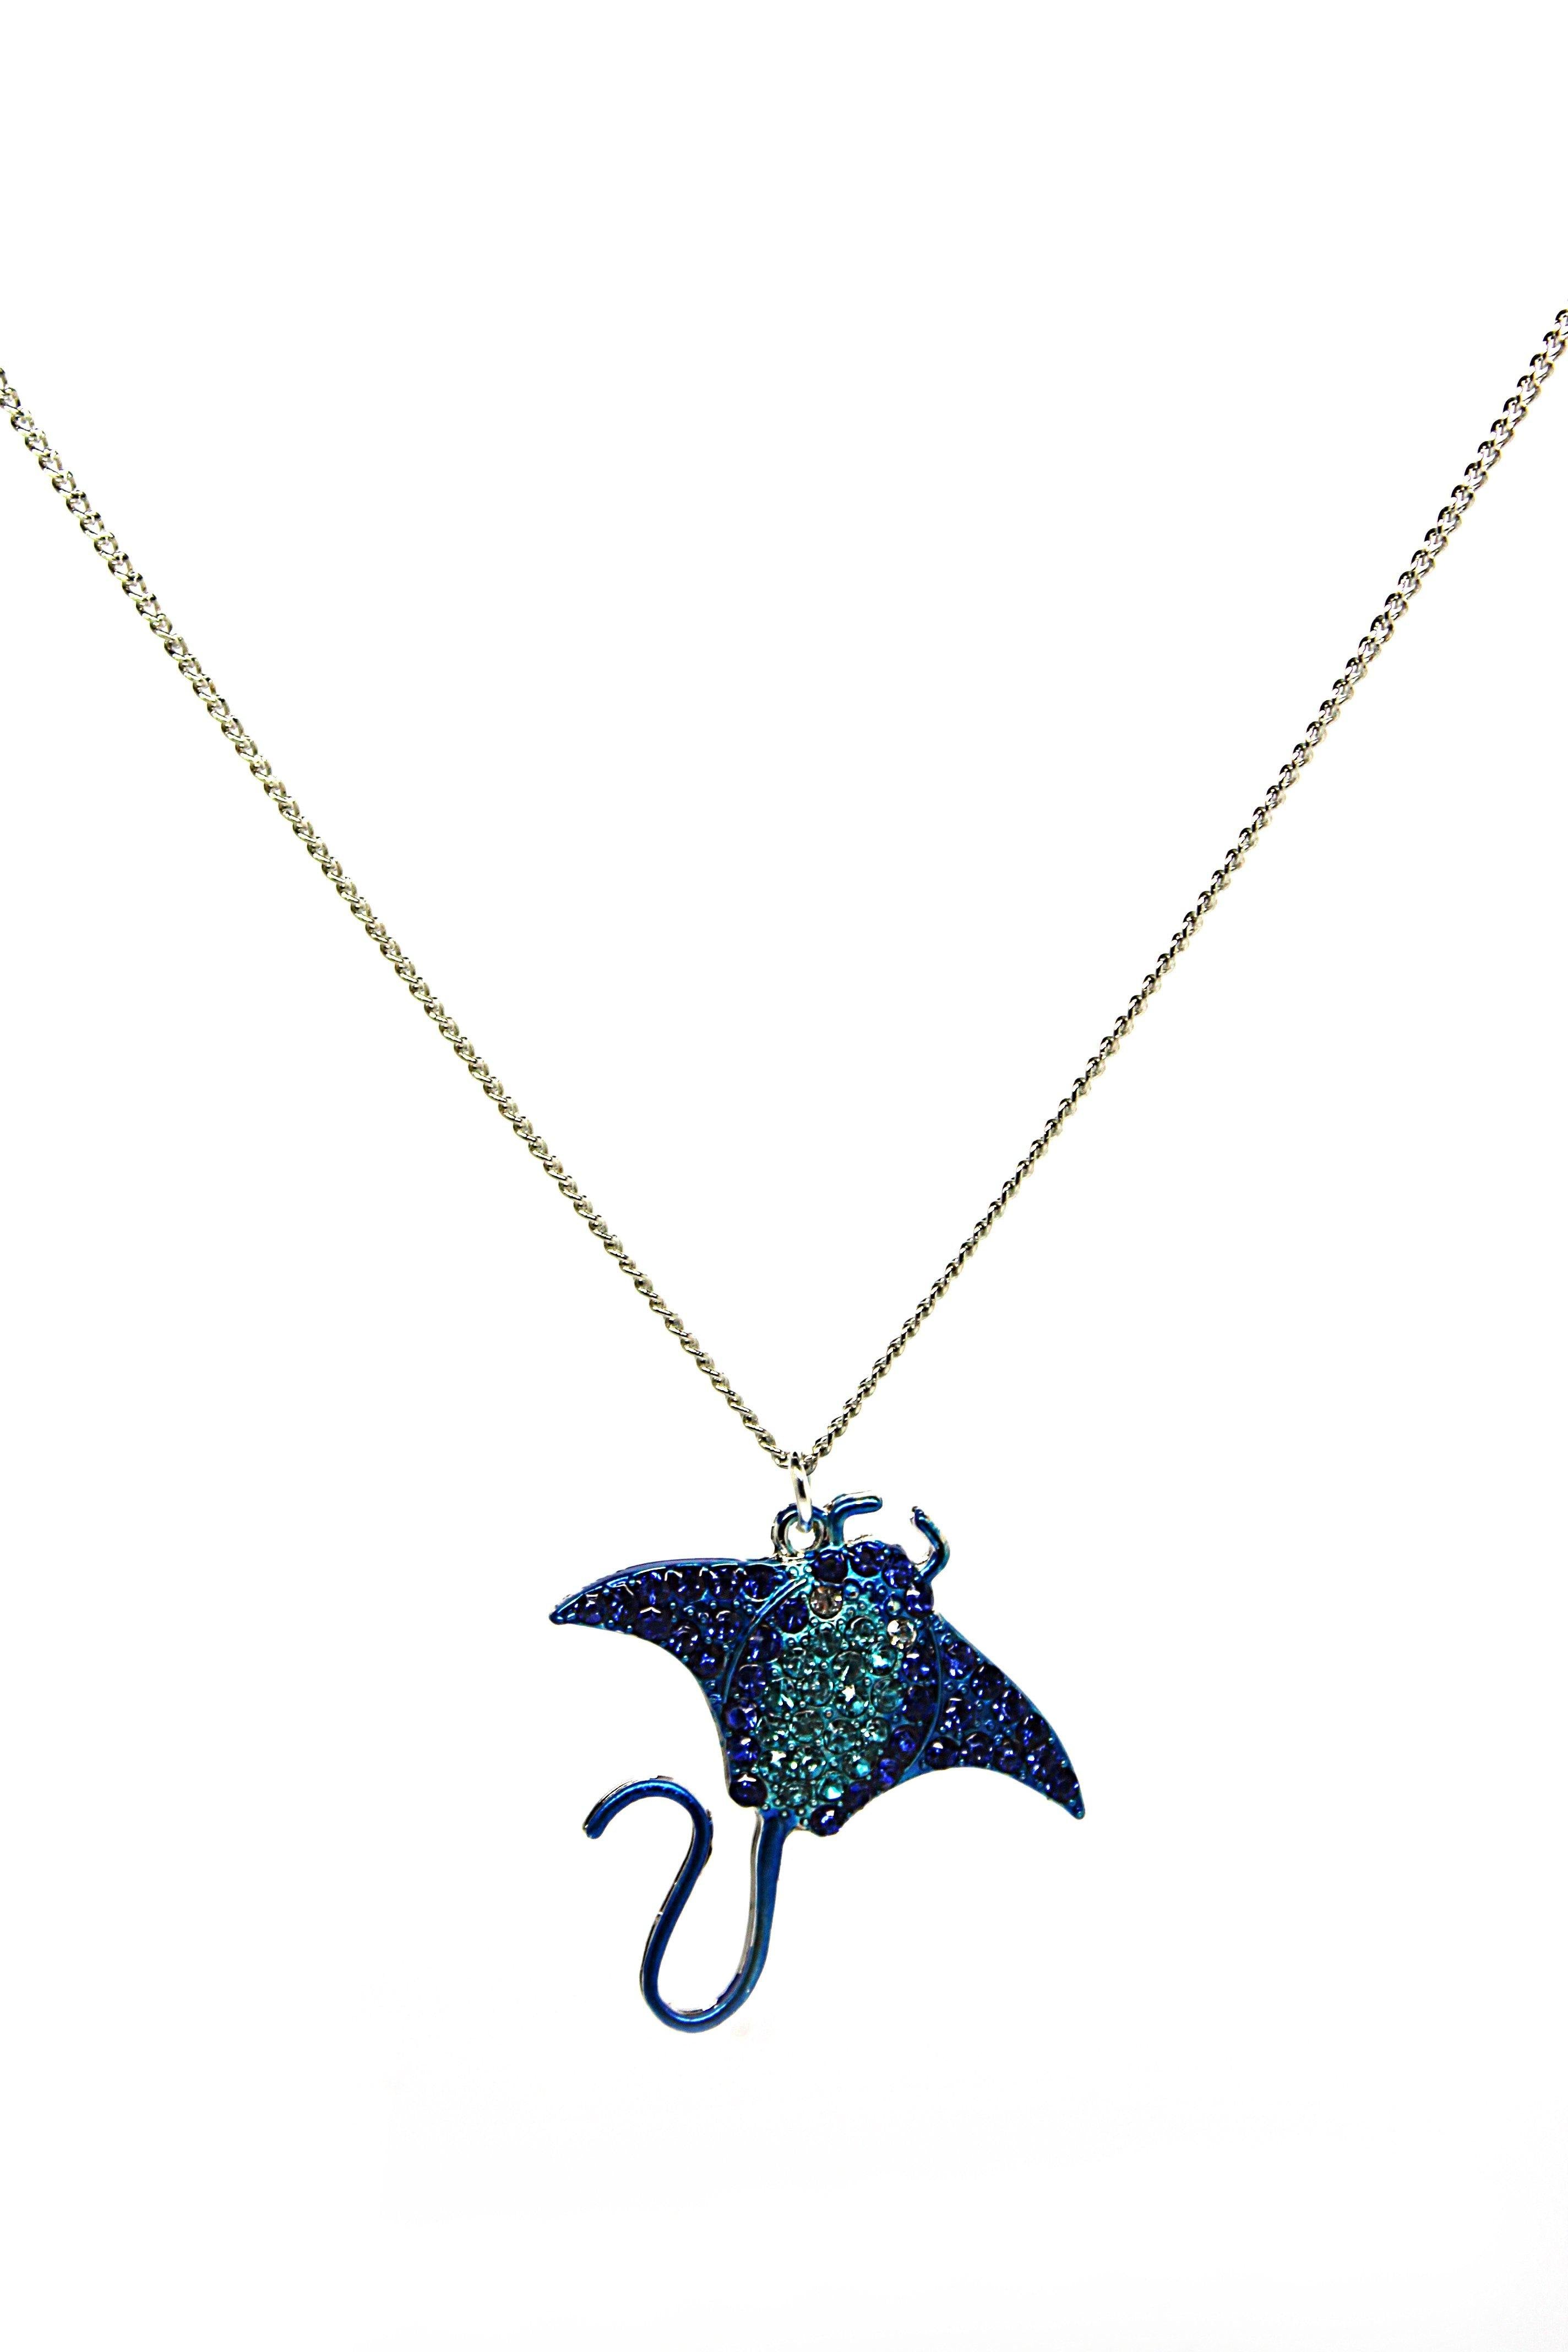 Stingray Blue Necklace - Wildtouch - Wildtouch